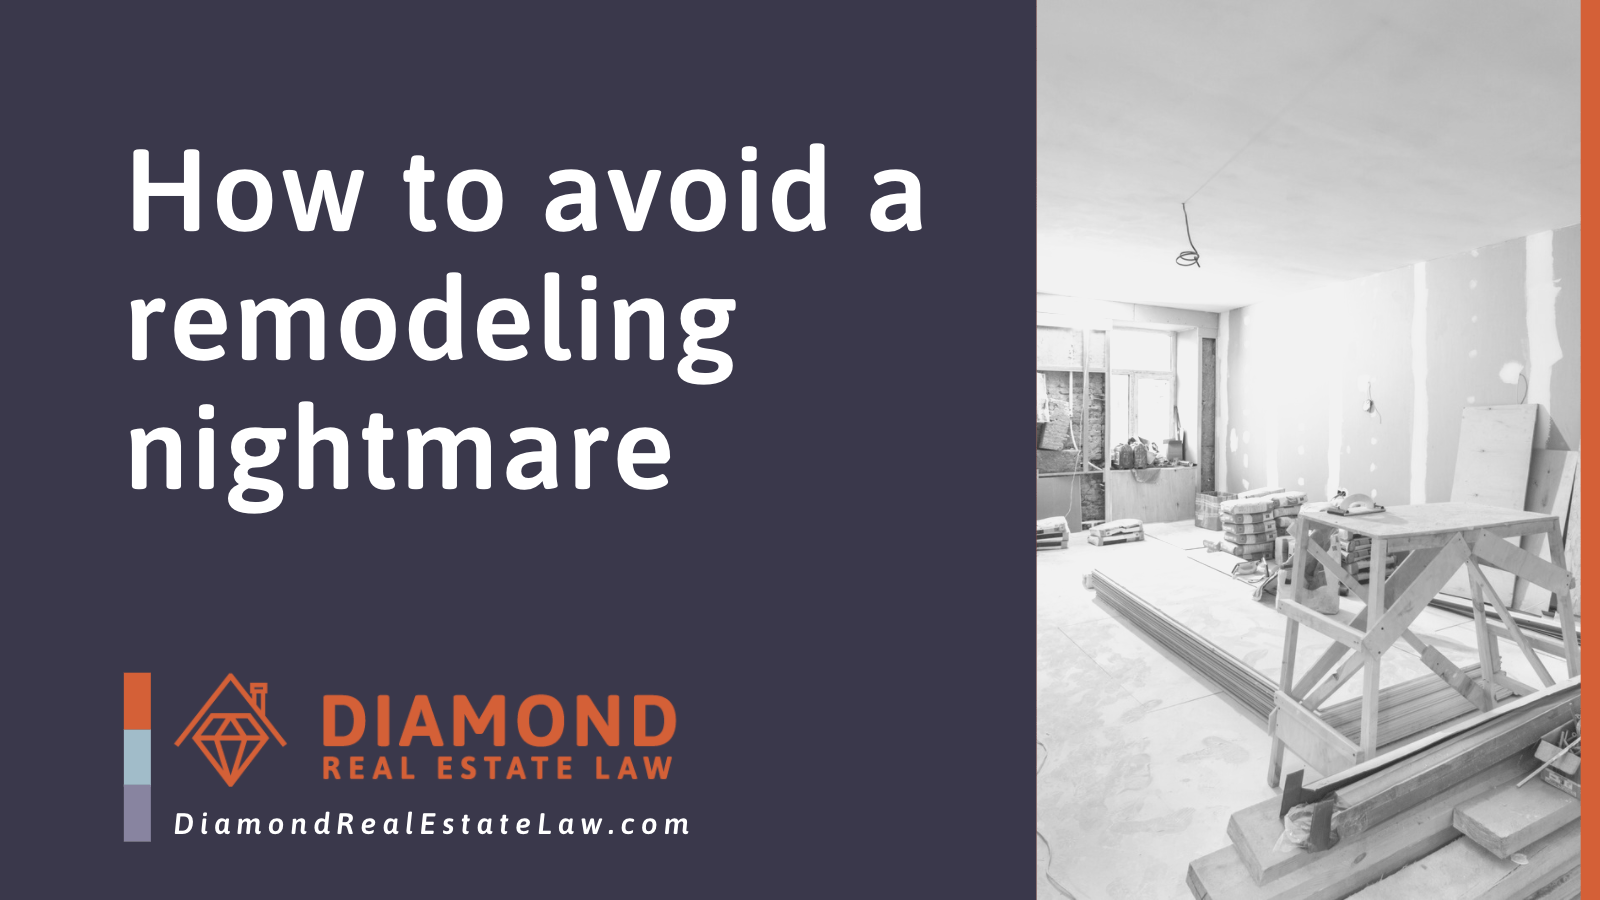 How to avoid a remodeling nightmare - Diamond Real Estate Law | McHenry, IL Residential Real Estate Lawyer